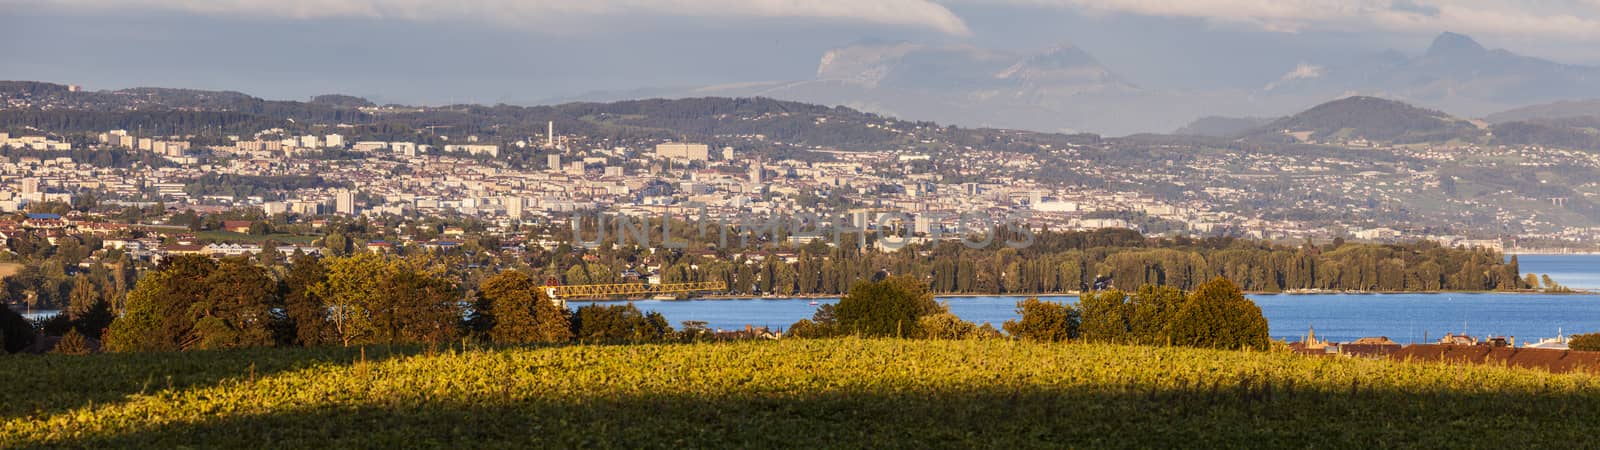 Panorama of Lausanne - seen late afternoon. Lausanne, Vaud, Switzerland.